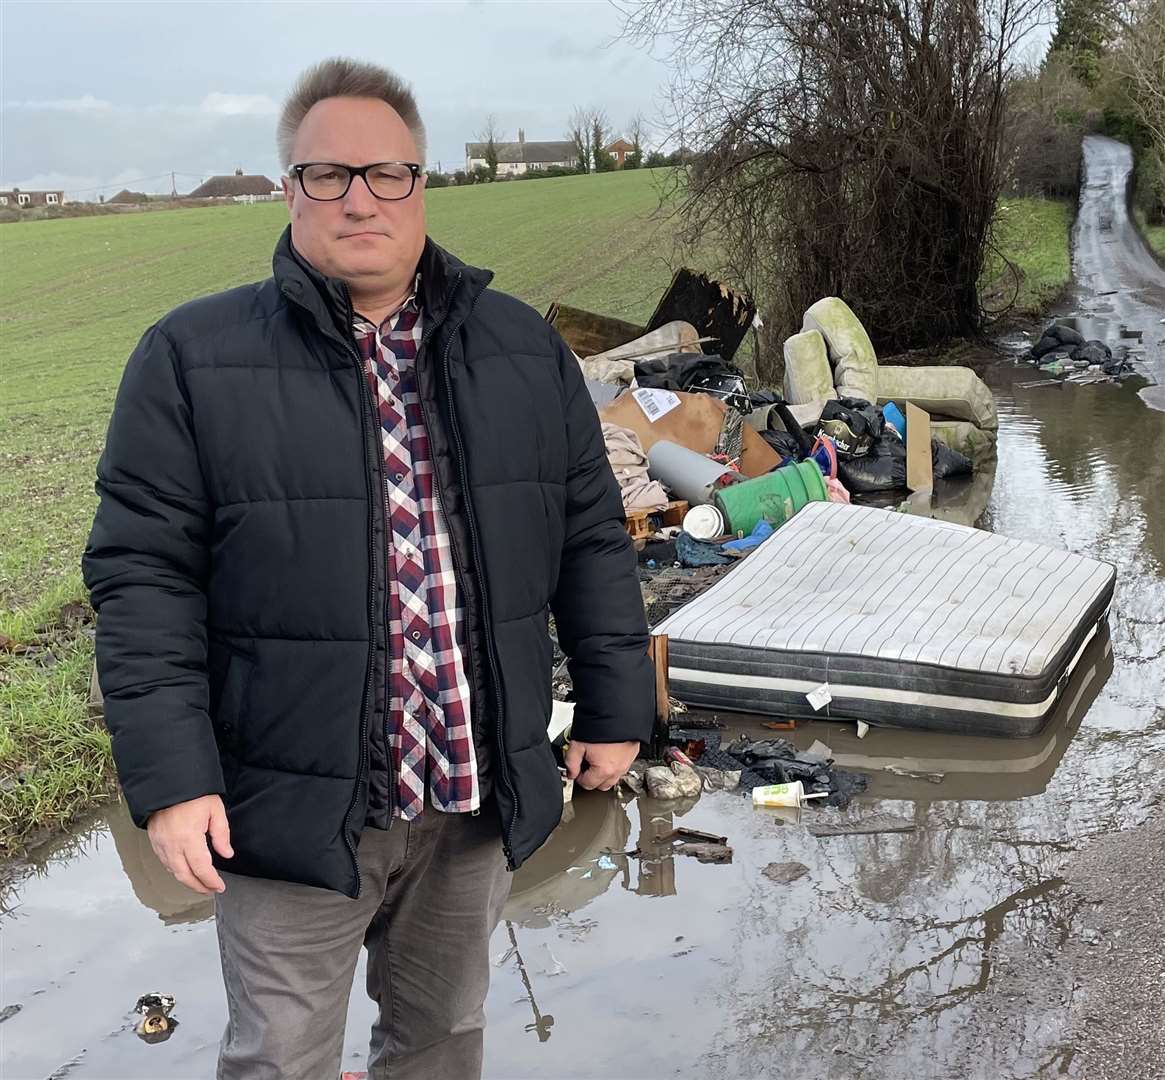 Alan has said there is constant fly-tipping in the area particularly around the potholes. Picture: Alan White